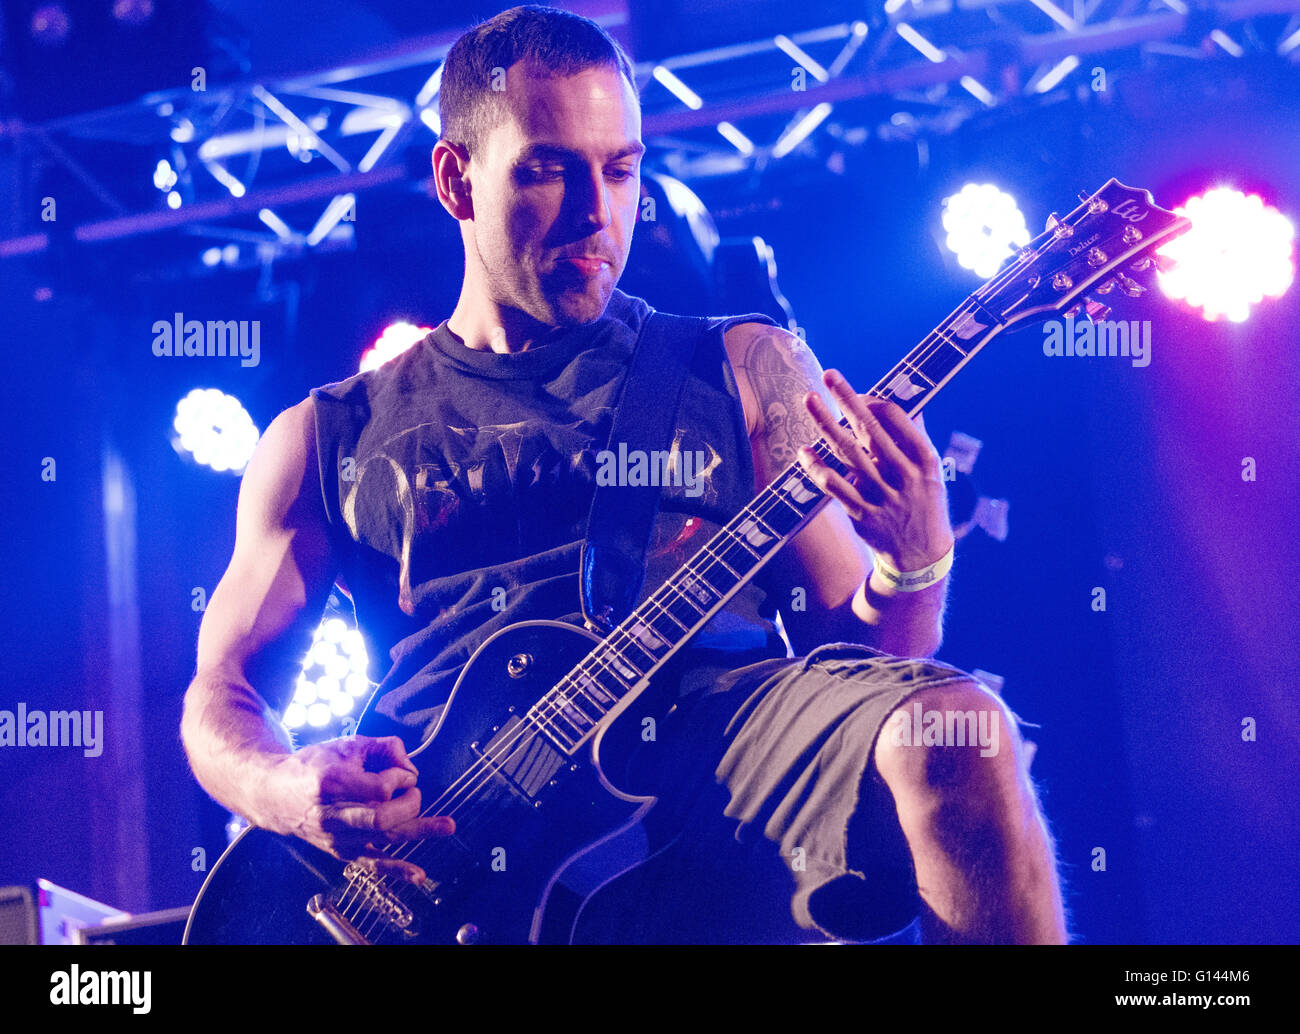 Oviedo, Spain. 7th May, 2016. Guitarist Jordan Posner plays during the  concert of American metalcore band 'Terror' at Otero Butal Fest on the Tour  of their new album 'The 25th Hour' on